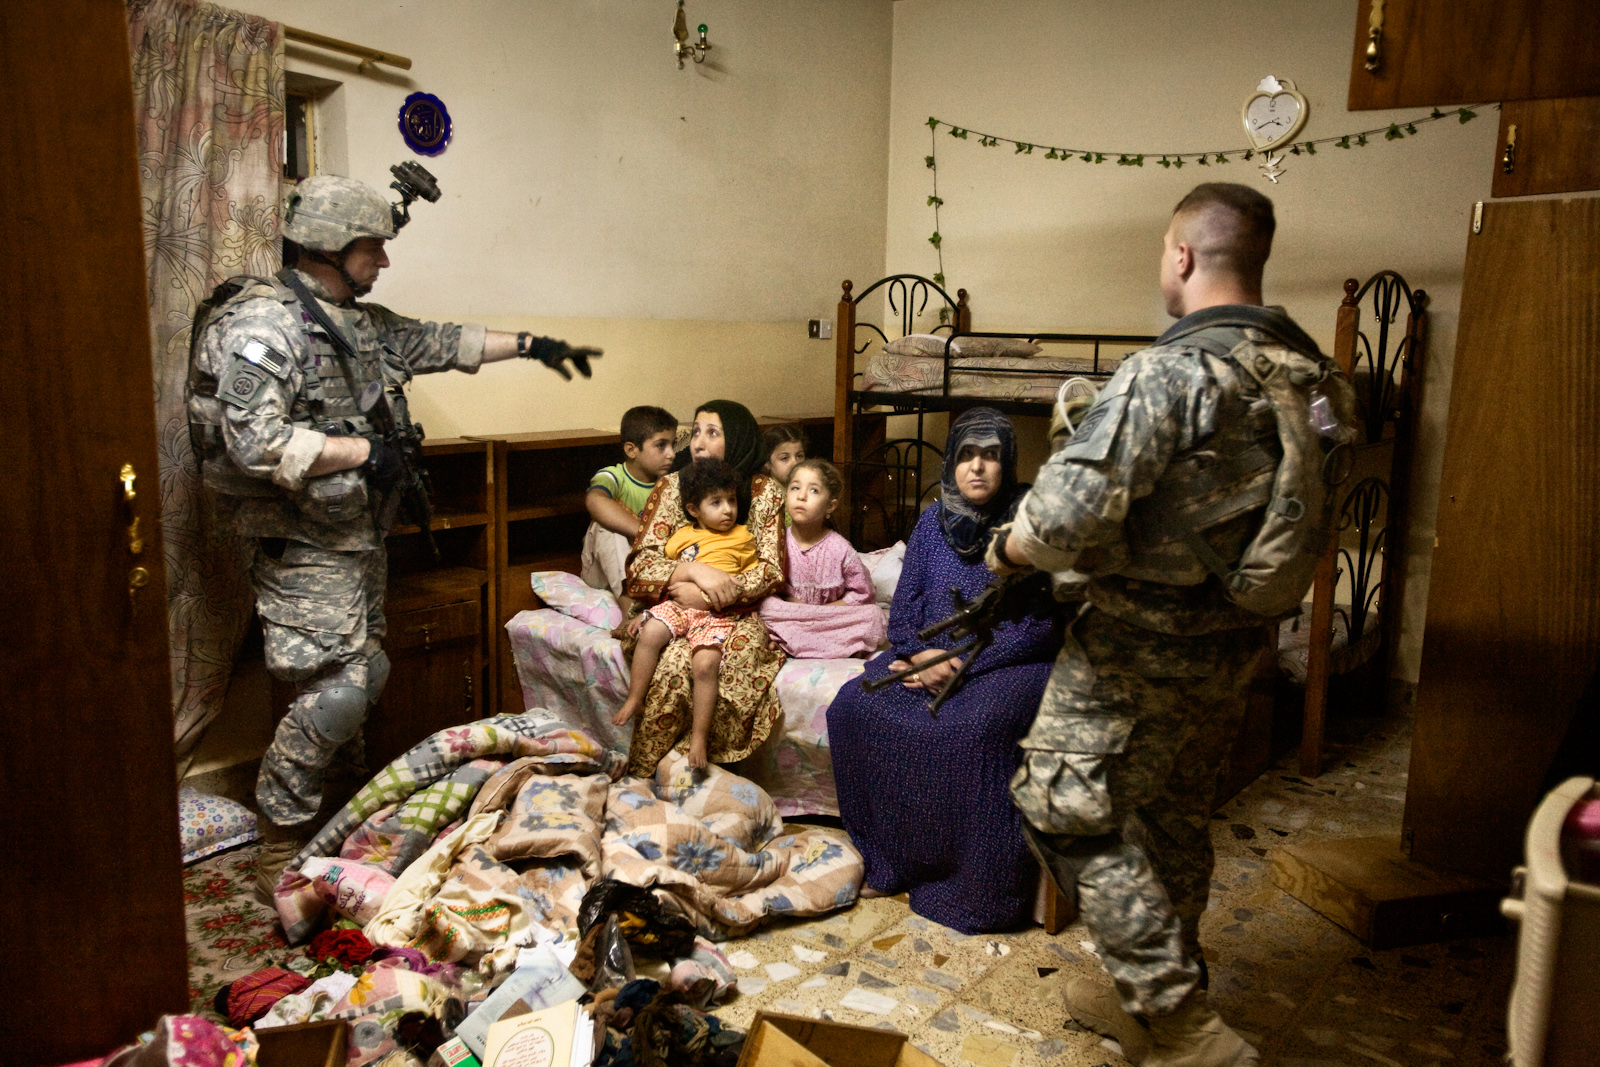 U.S. soldiers raid a home where they arrested two al Qaeda supporters in Samarra, Iraq, Sept, 28, 2007. This is the last mission for the 'Smash Platoon' before returning to the U.S.